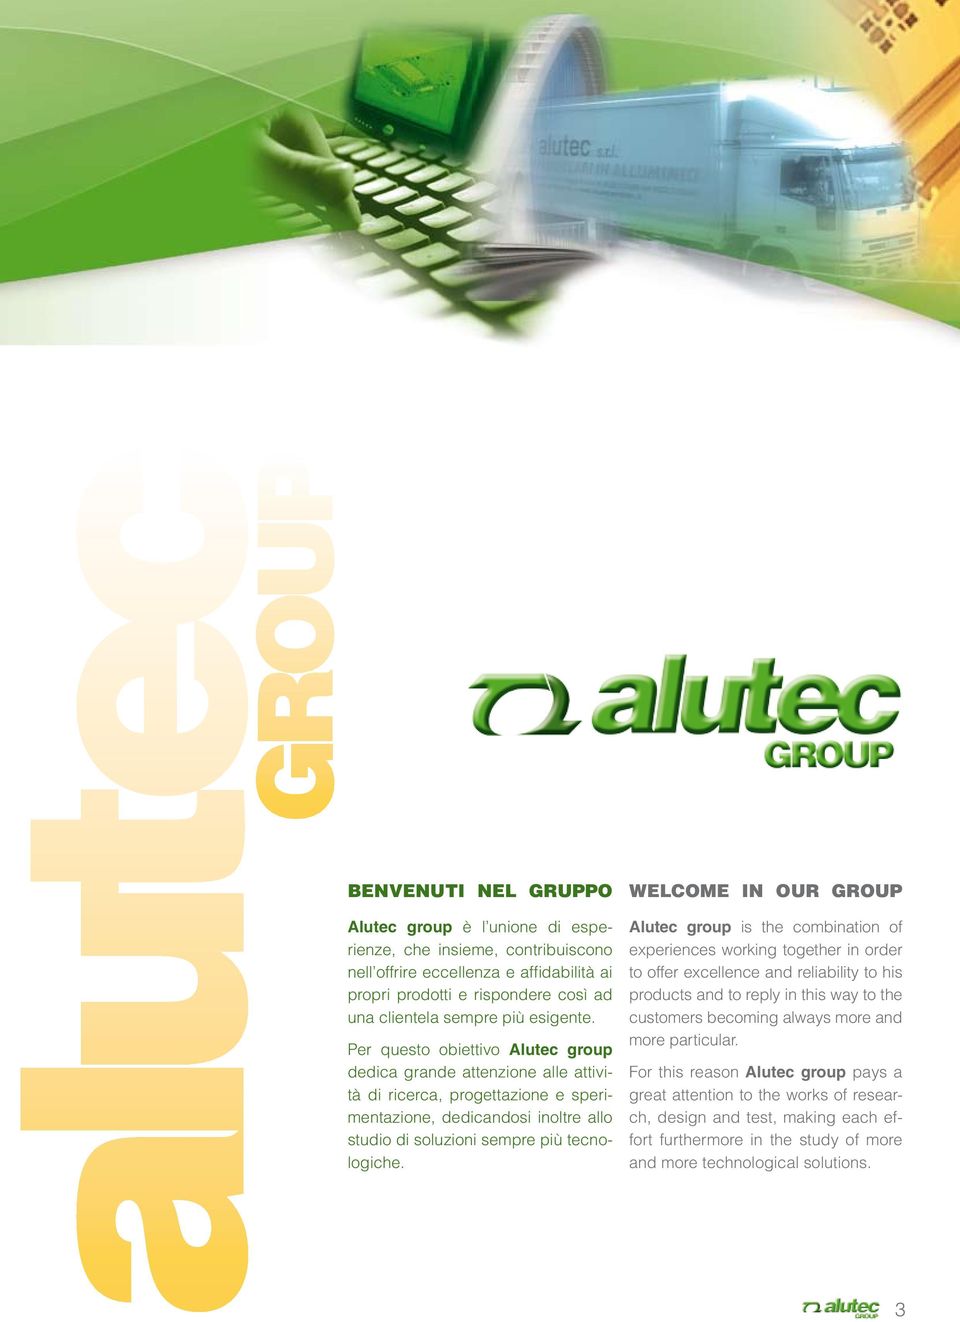 WELCOME IN OUR GROUP Alutec group is the combination of experiences working together in order to offer excellence and reliability to his products and to reply in this way to the customers becoming